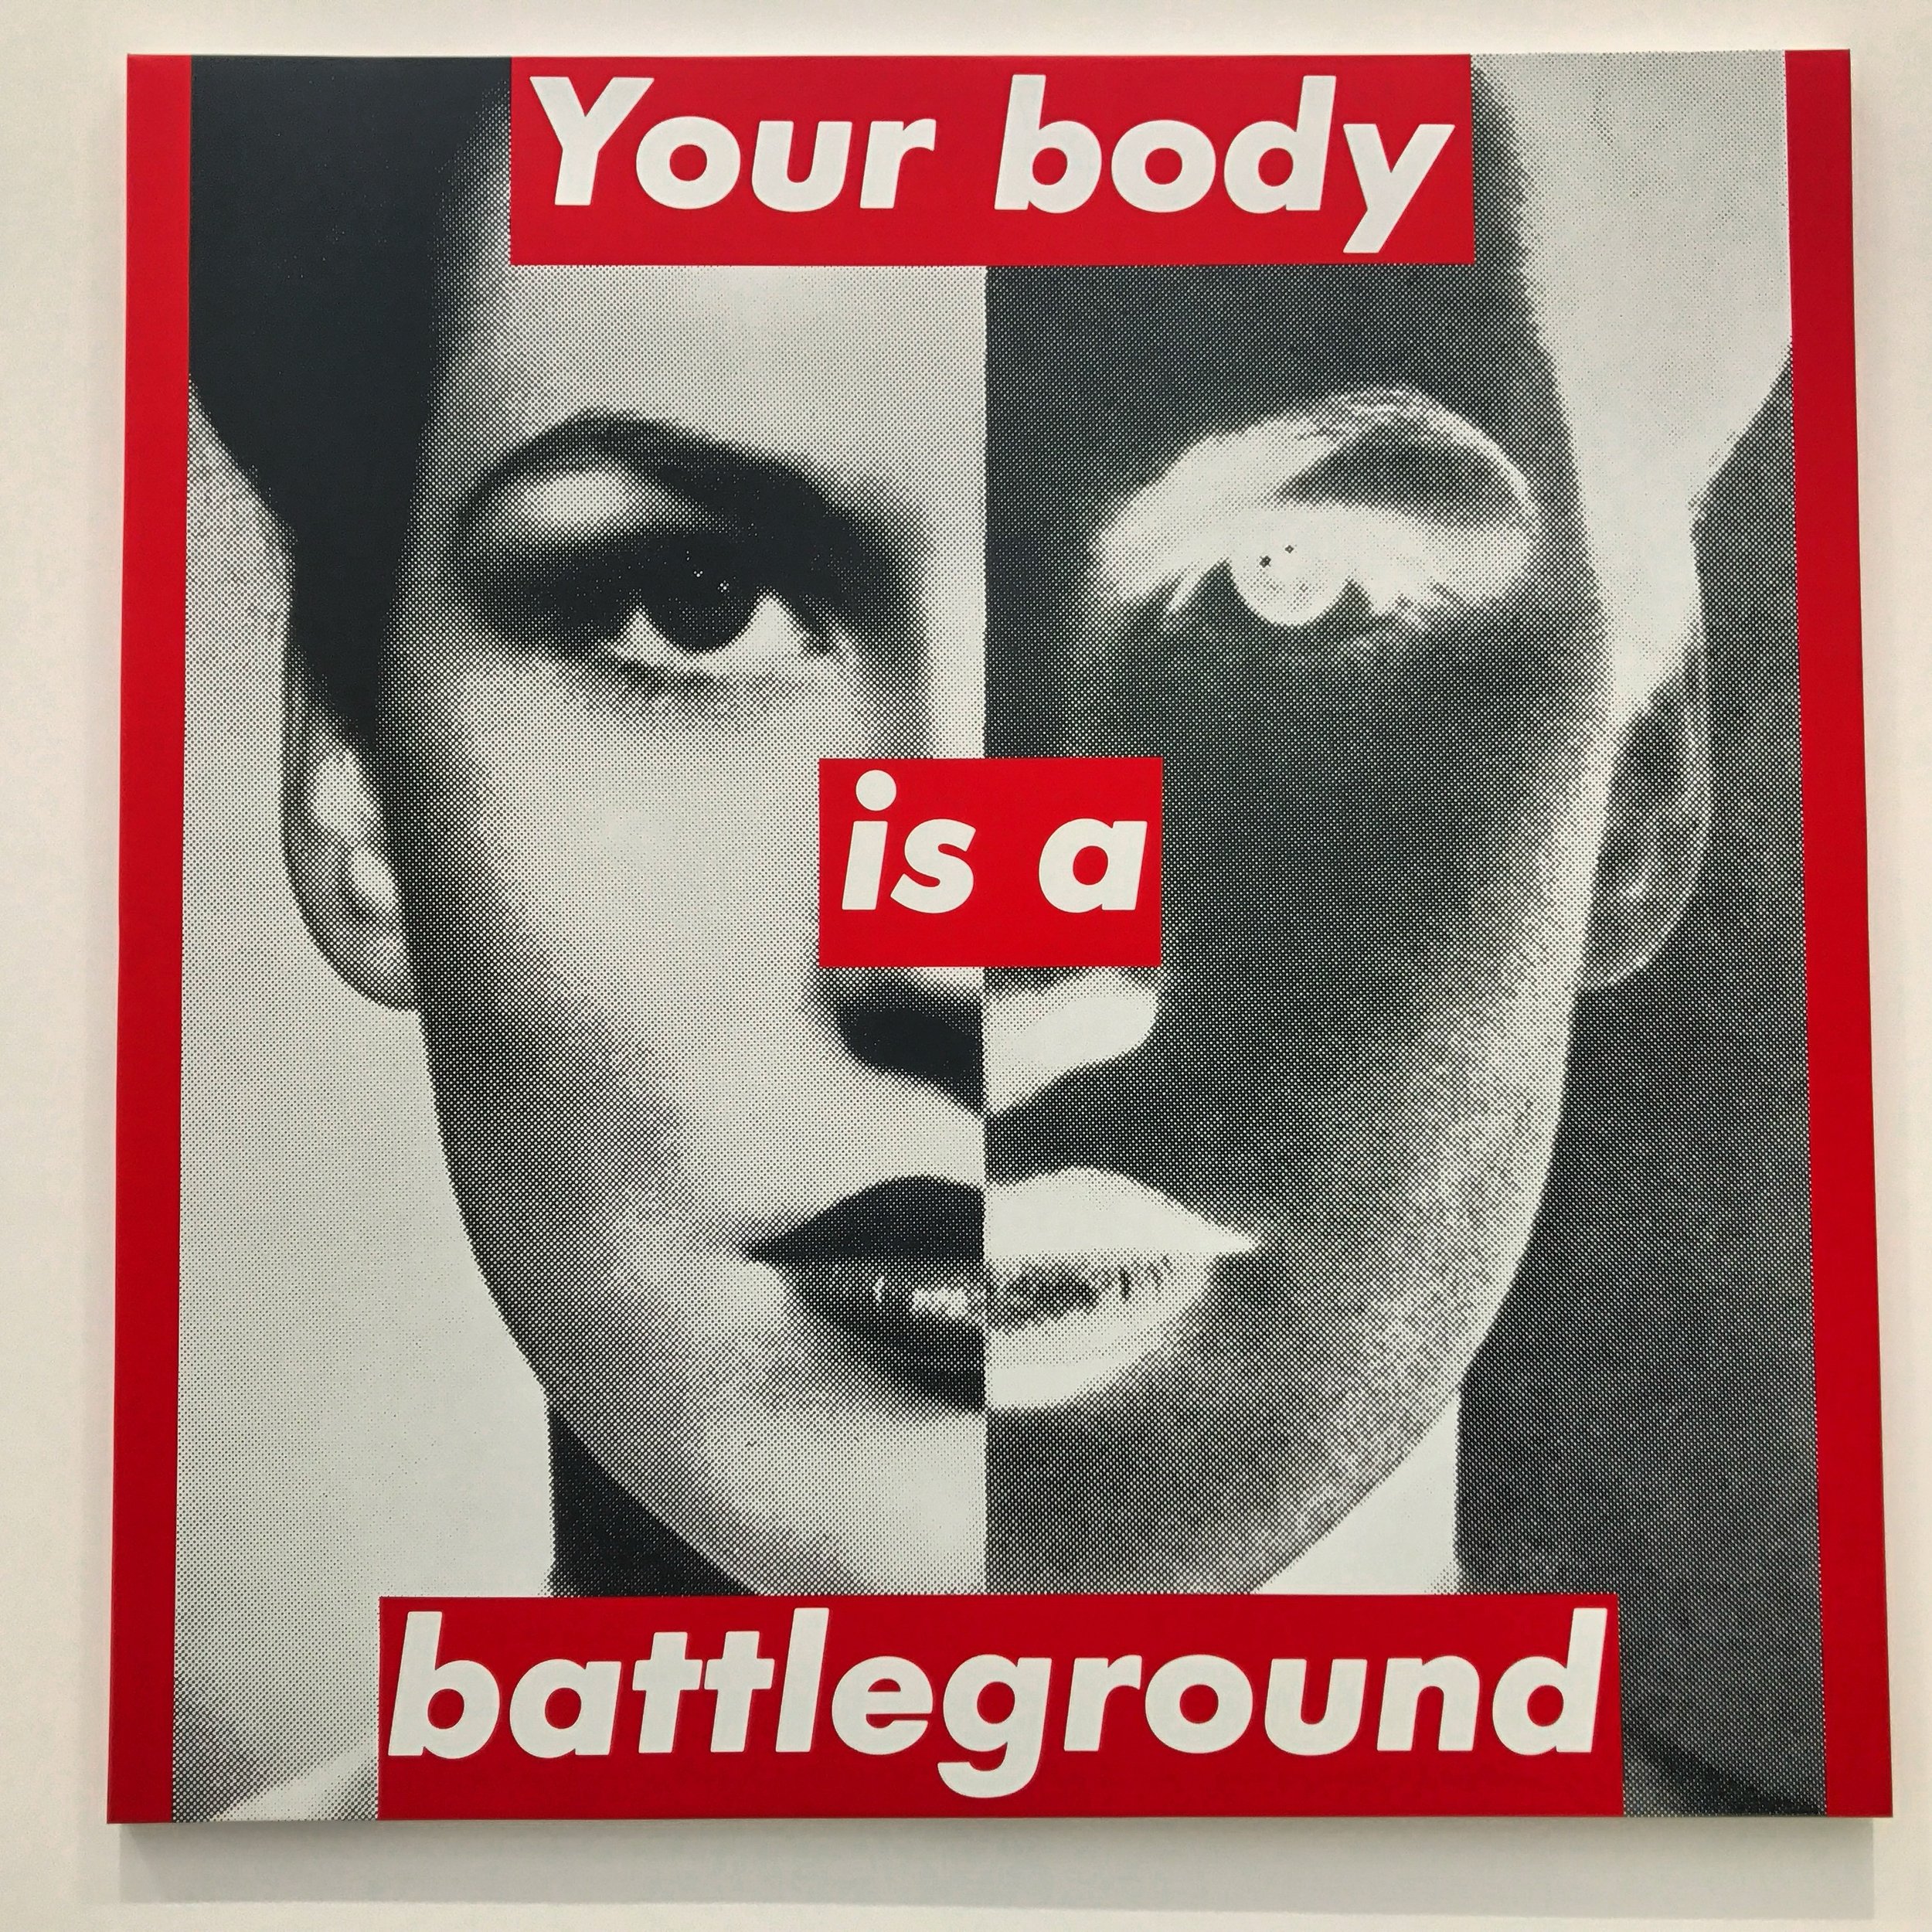 Untitled (Your body is a battleground) by Barbara Kruger 1989. 

I saw this piece in 2017 at @thebroadmuseum in LA. I stood staring at it for a long while and snuck a photo to remember it later.

Kruger originally produced this work for the Women&rsq